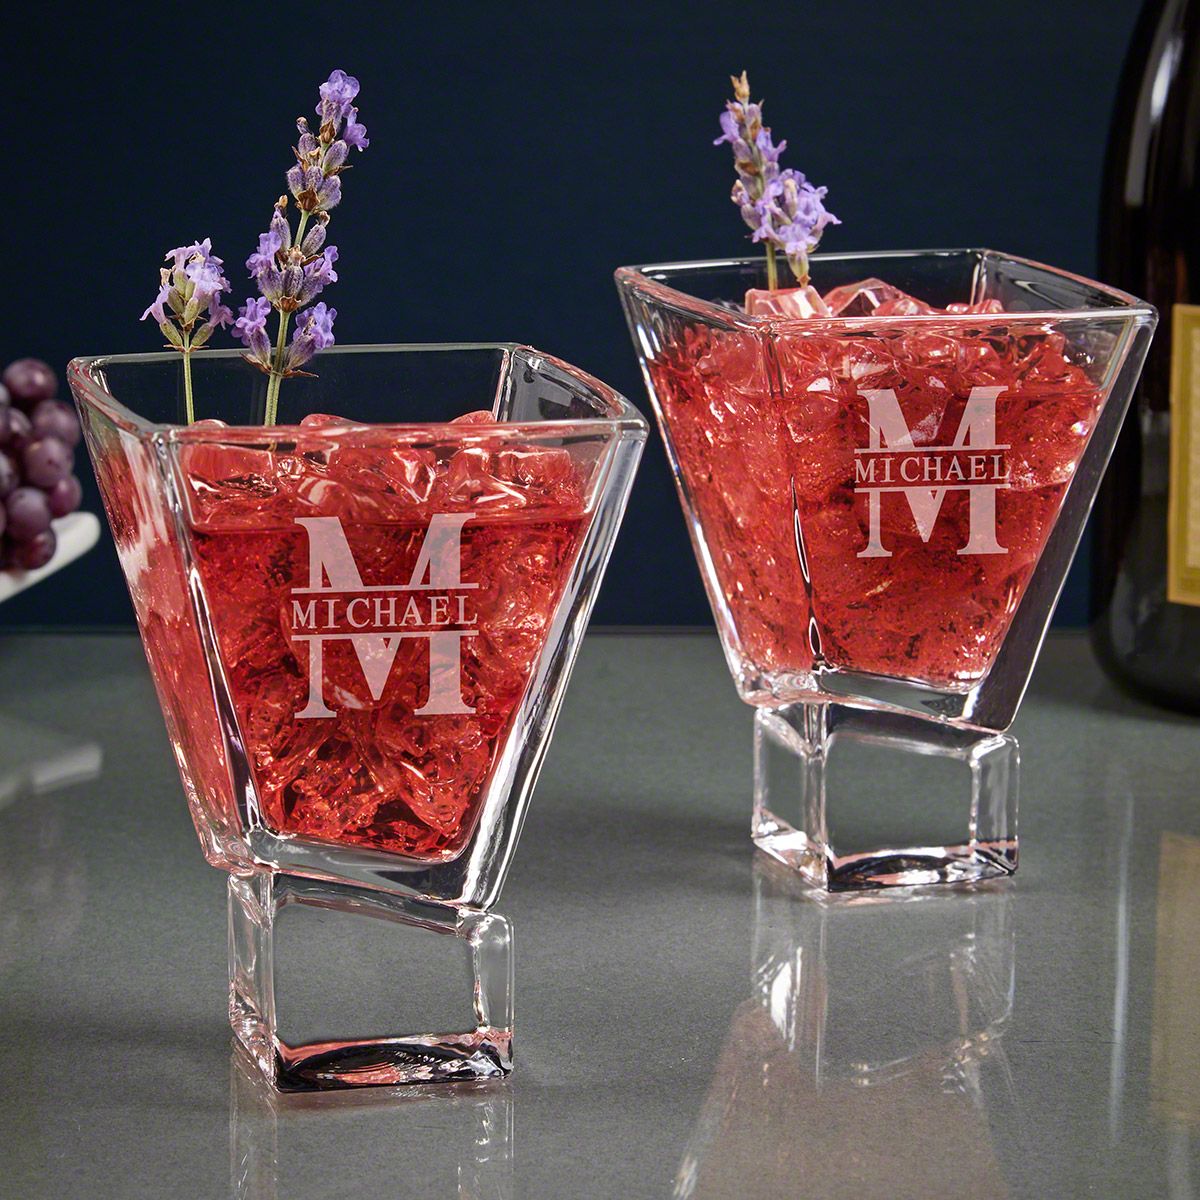 https://images.homewetbar.com/media/catalog/product/o/a/oakmont-set-of-two-personalized-cocktail-glasses_9612.jpg?store=default&image-type=image